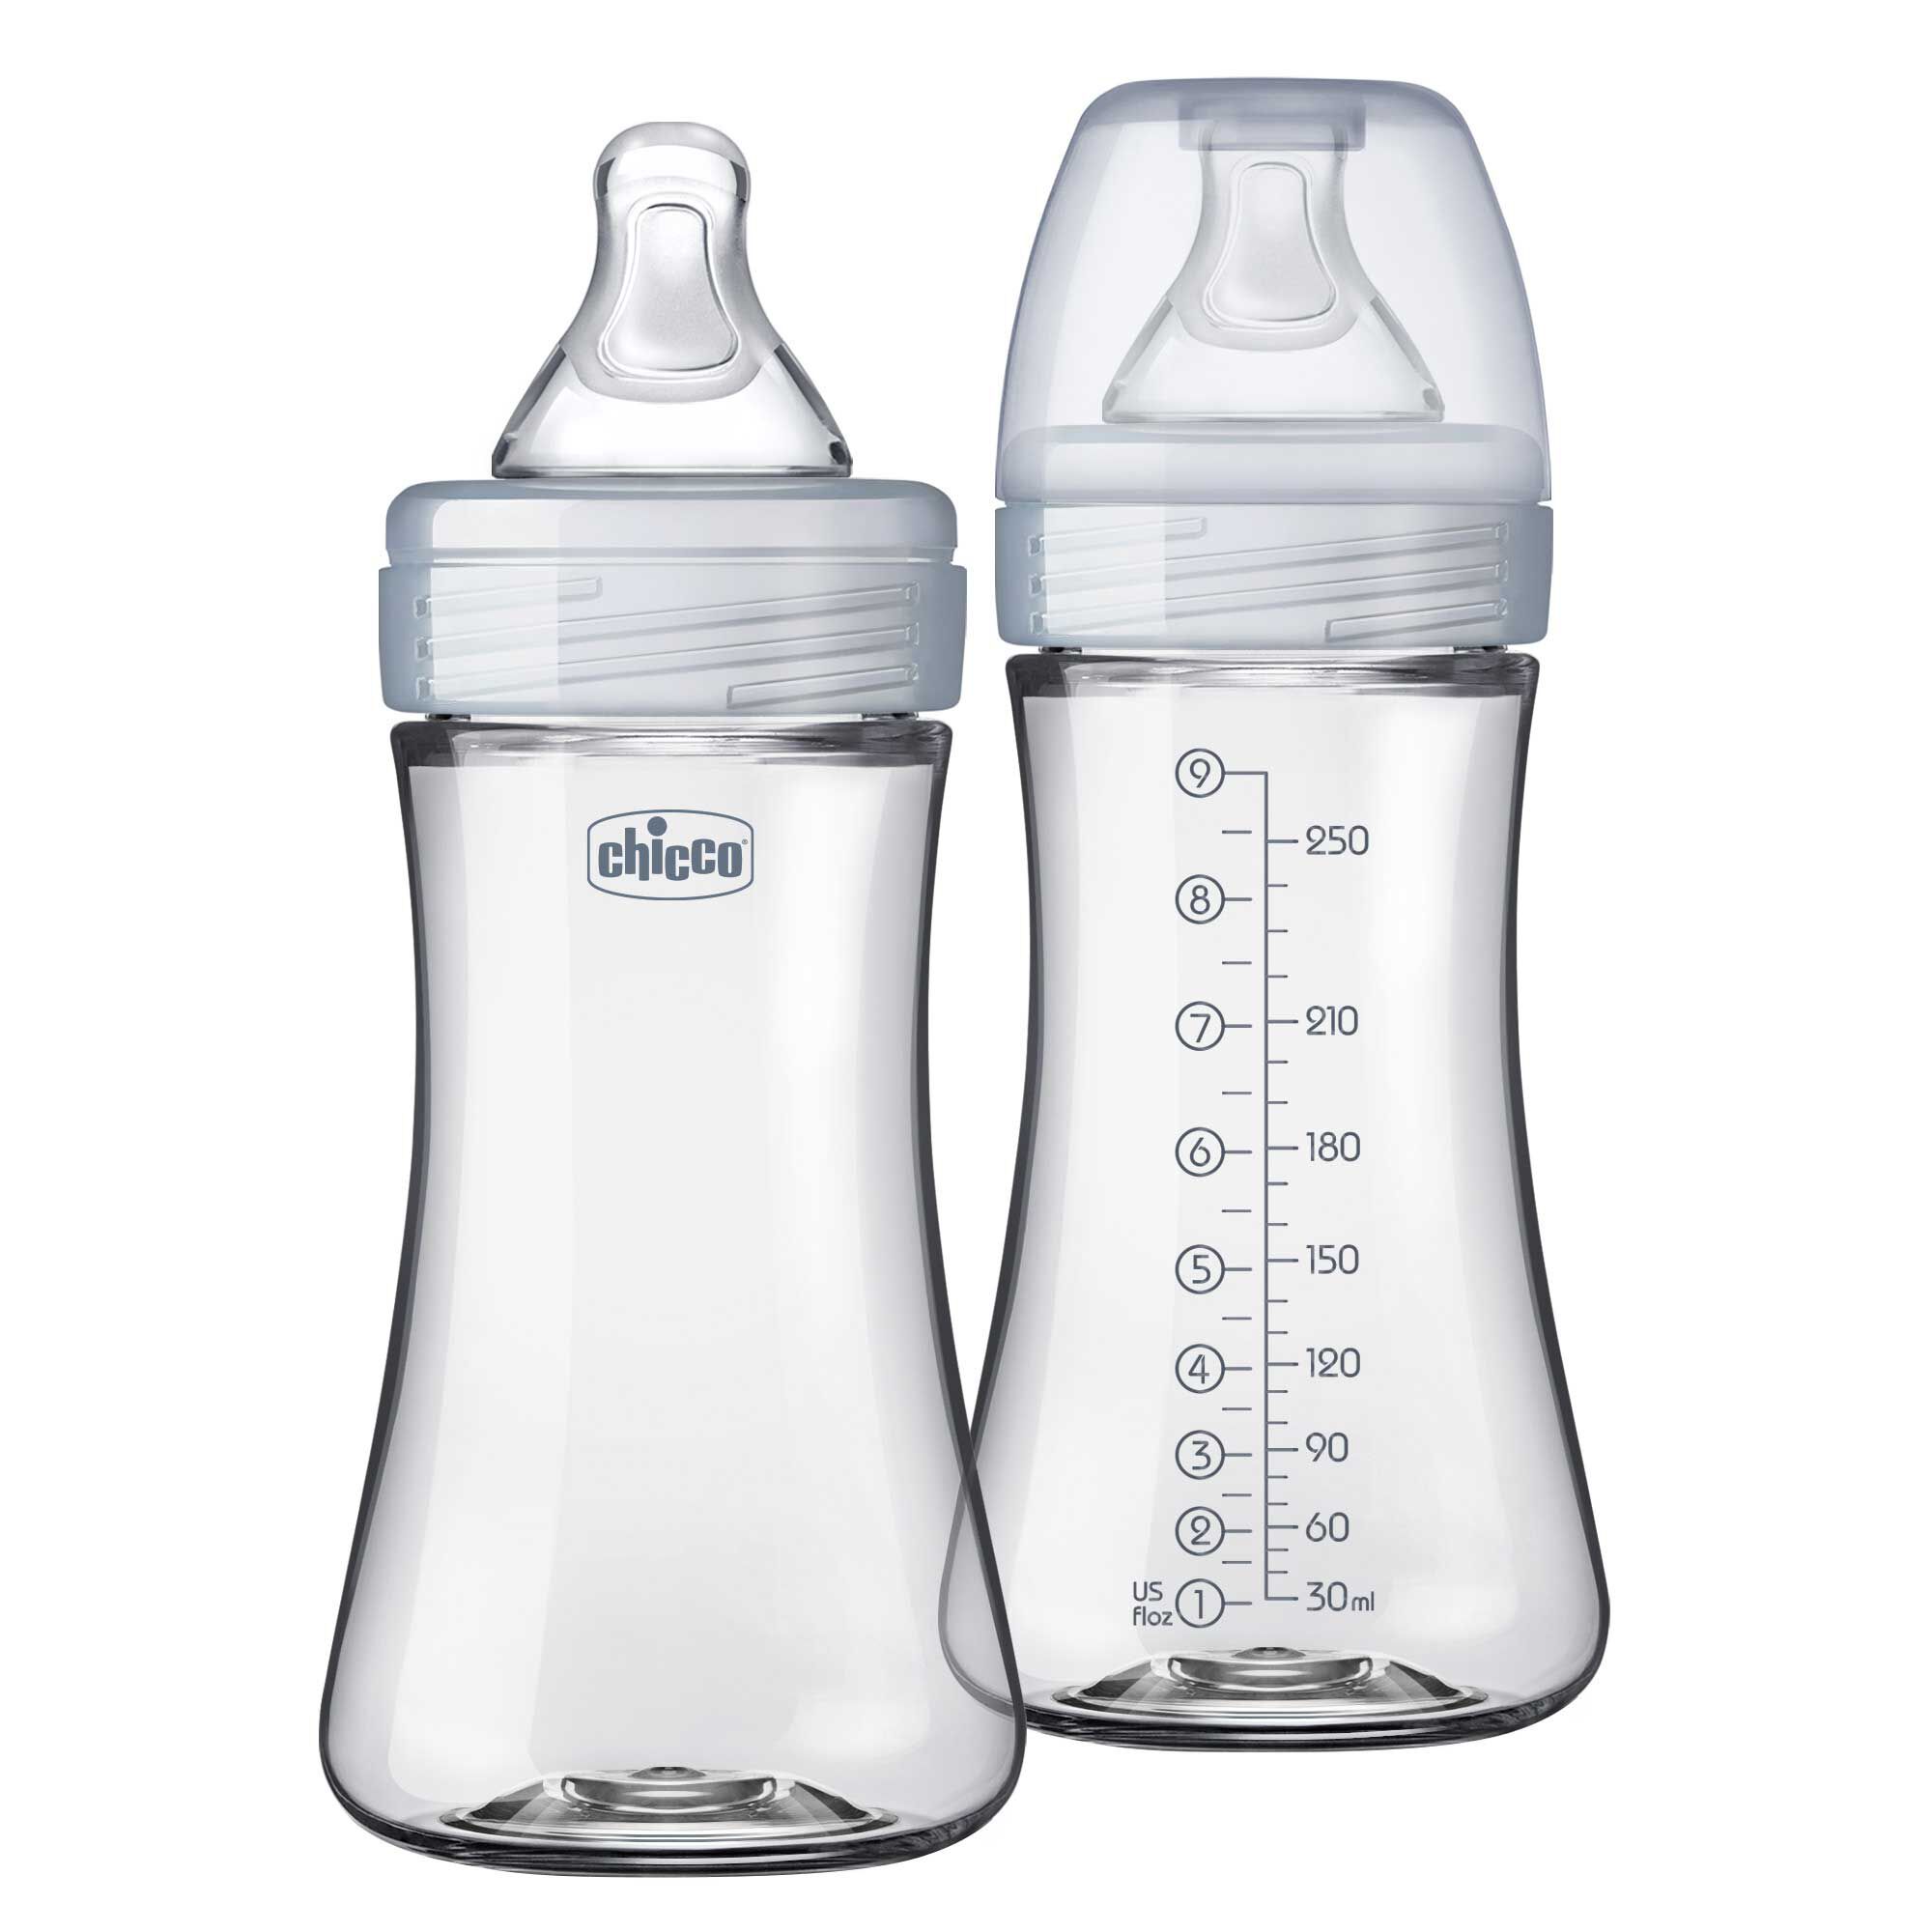 MAM Bottle Feel Good, Extra-Small Glass Baby Bottle with Extra Slow Flow MAM  0